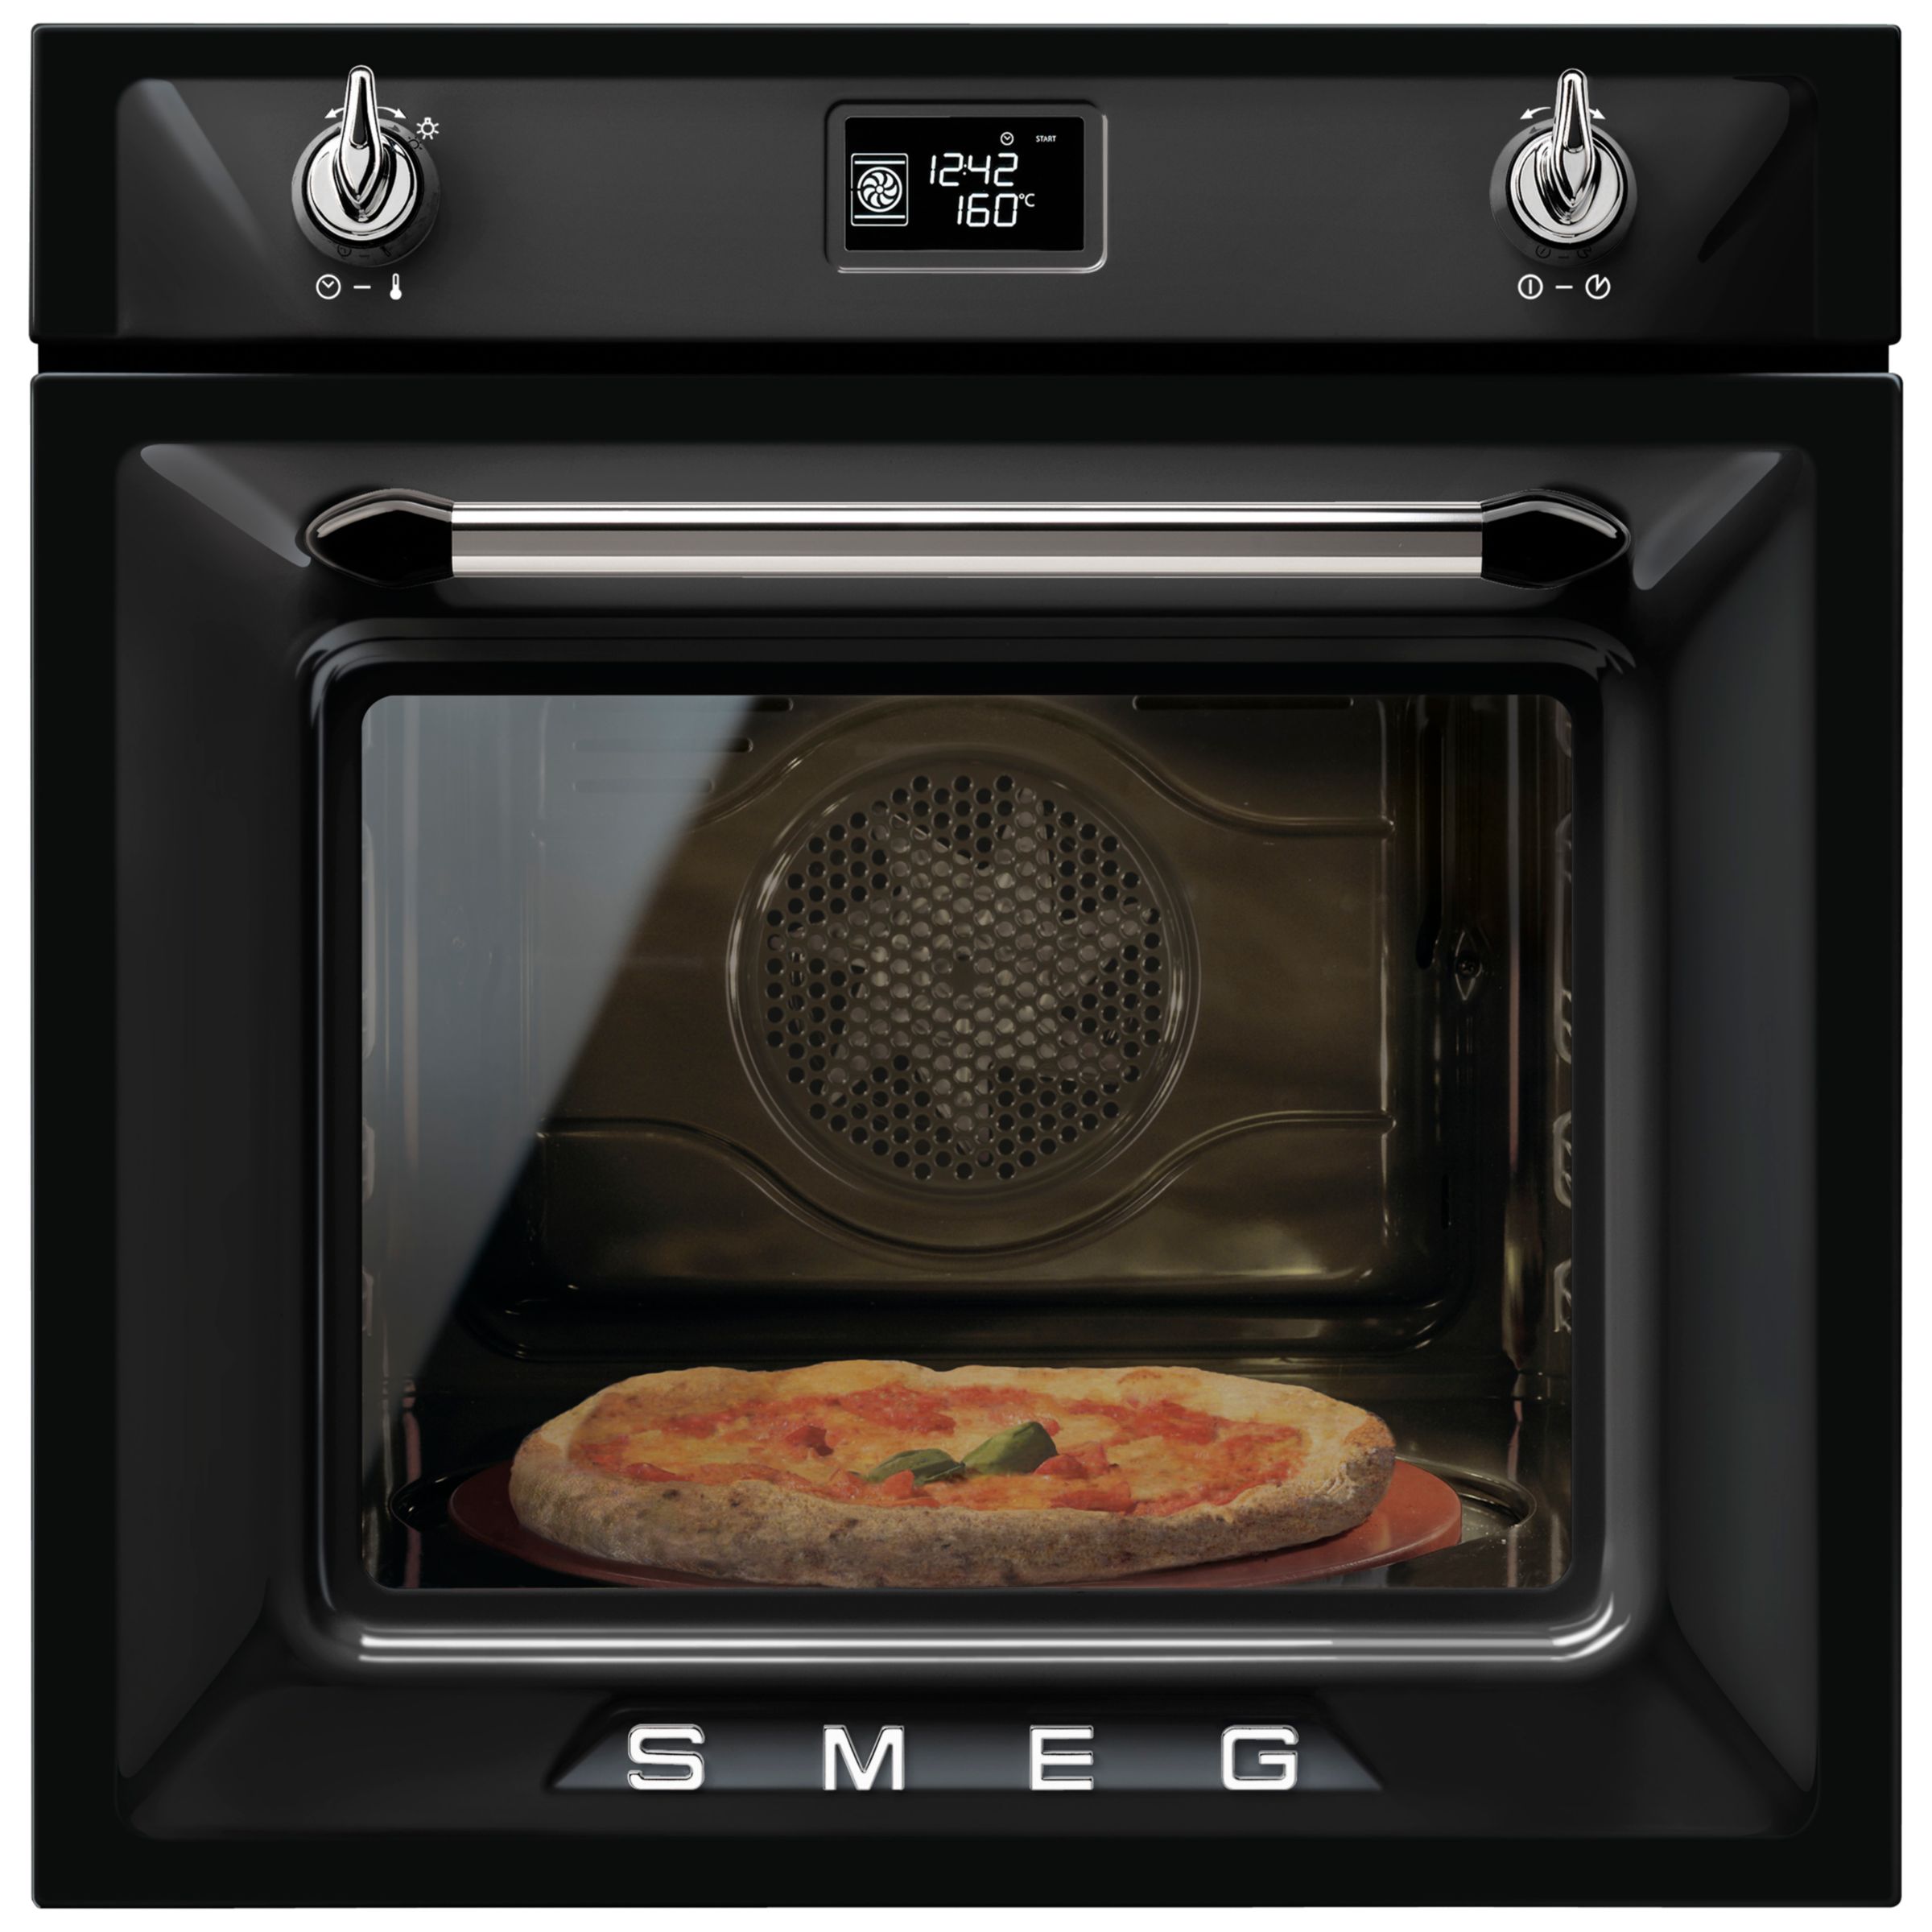 Electric ovens with steam фото 55